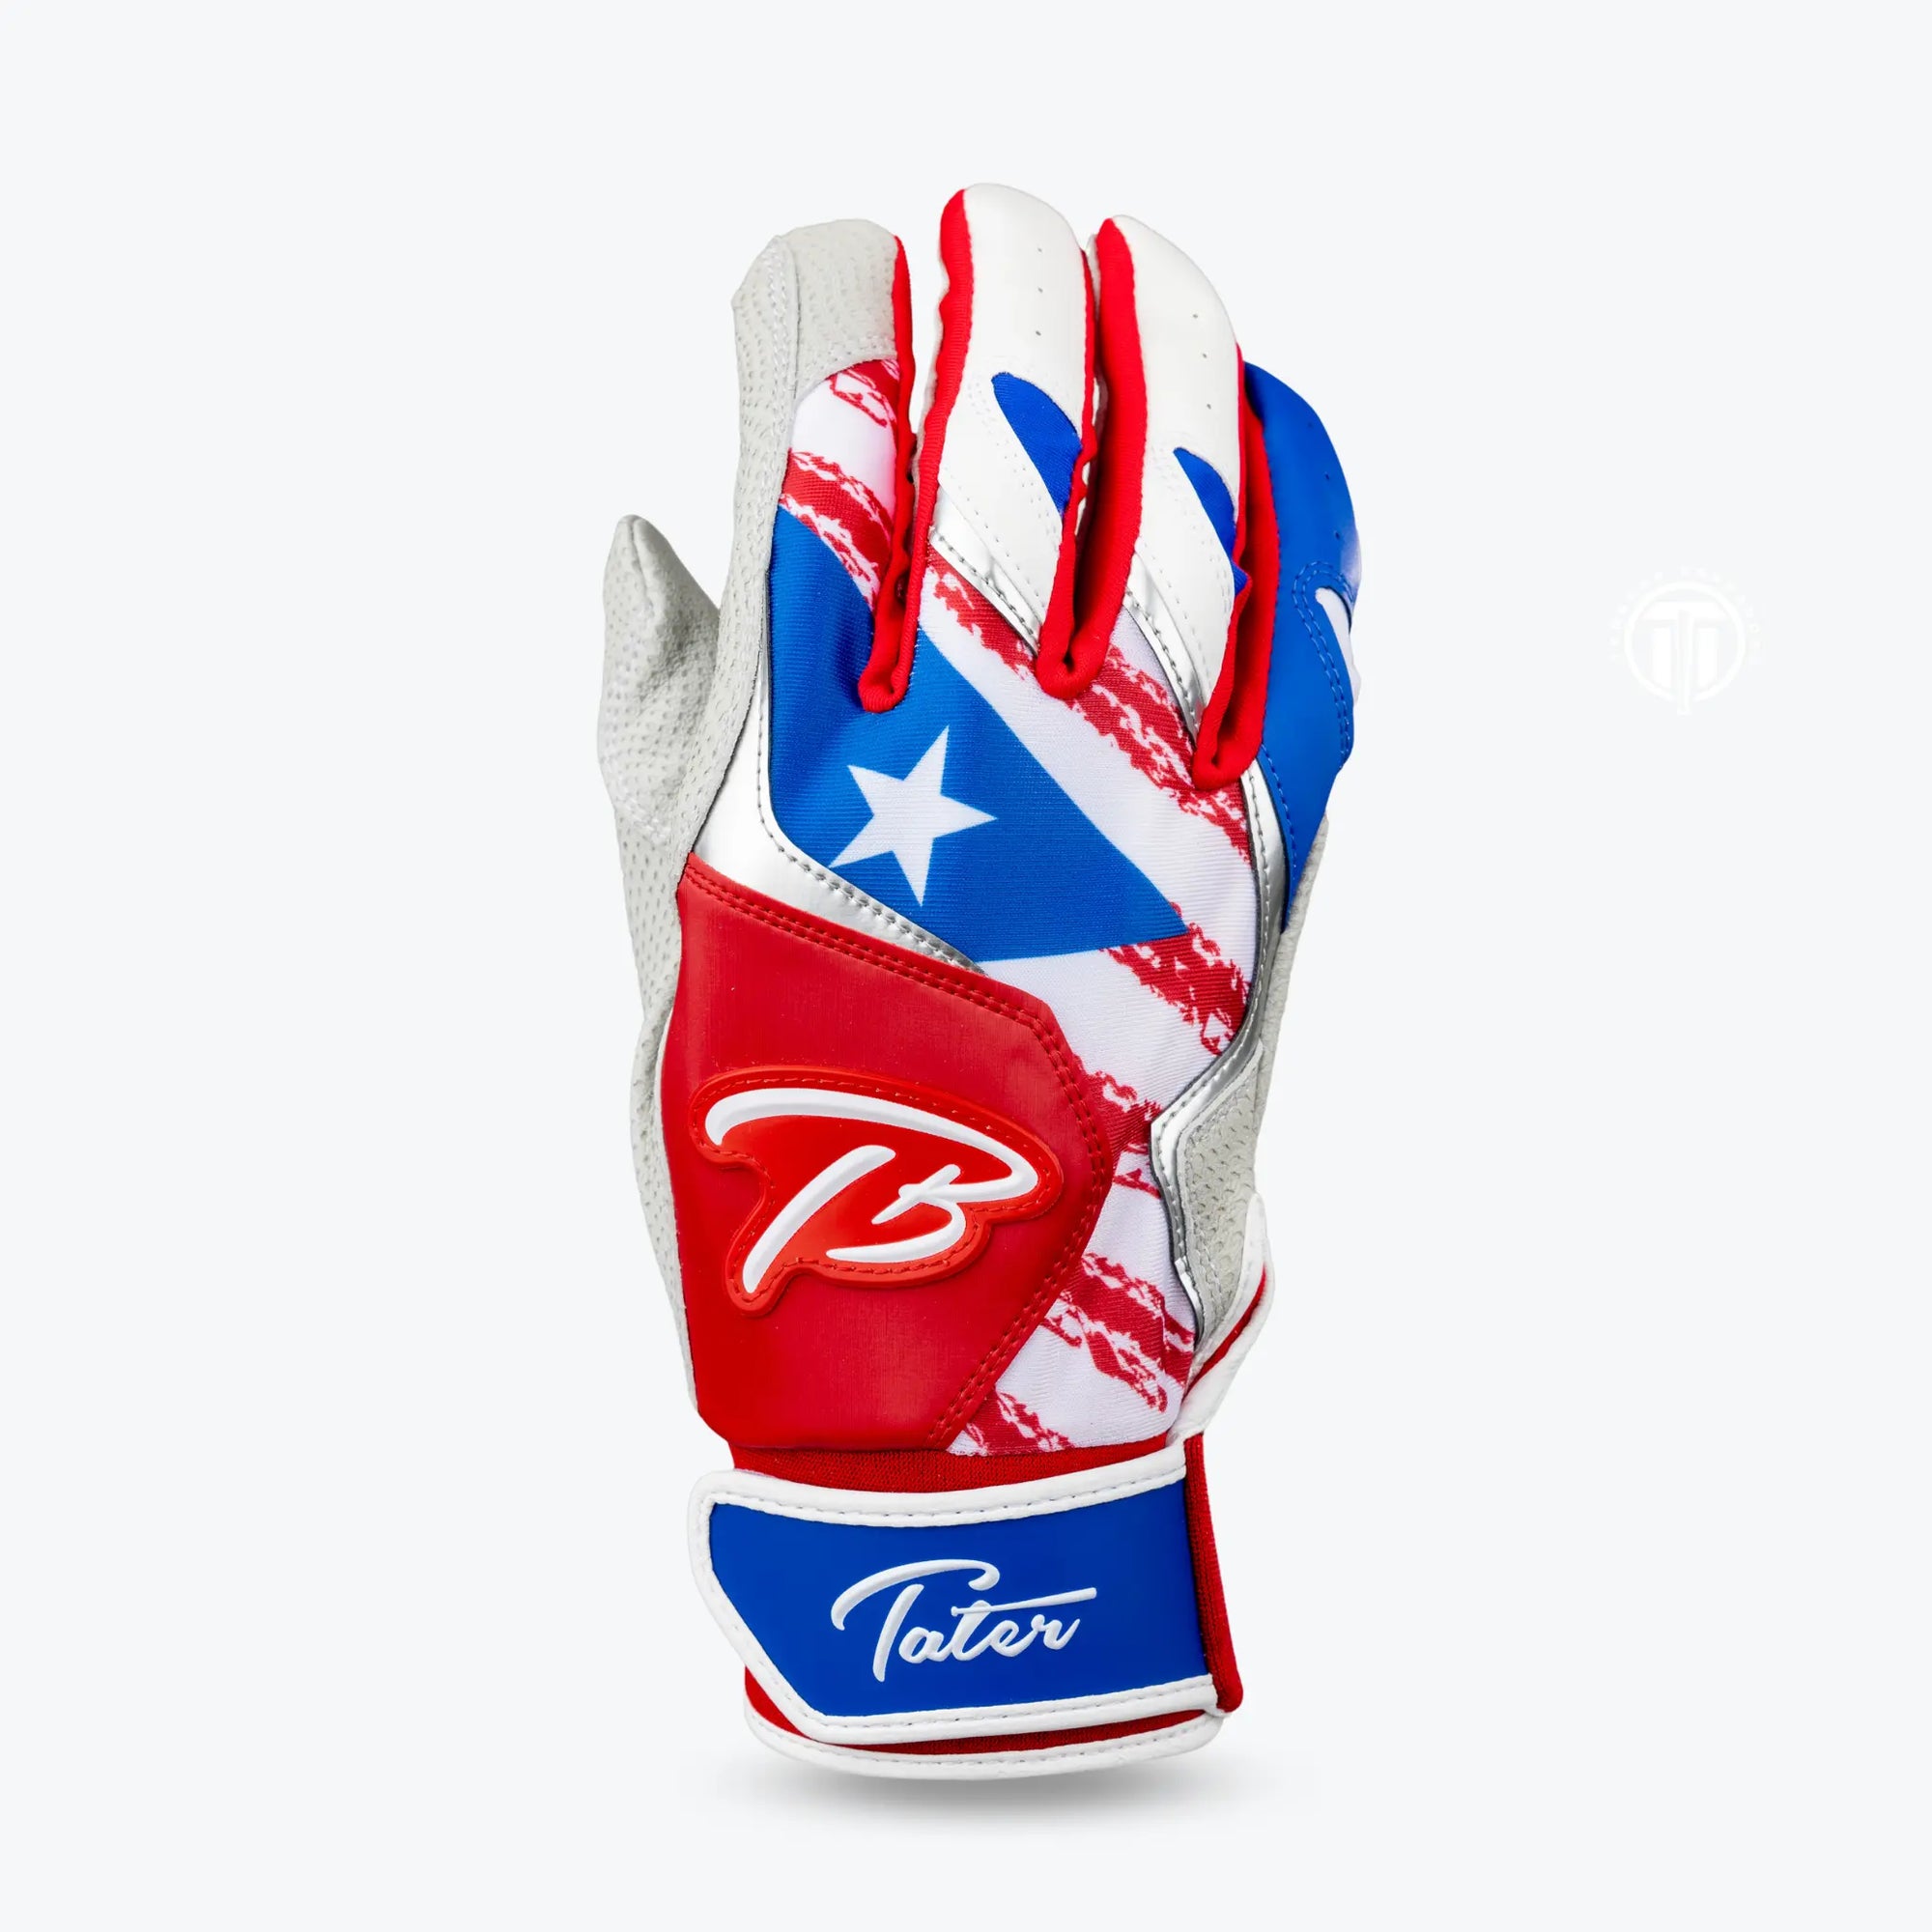 High-performance Tater baseball batting gloves featuring a Puerto Rico-inspired design with vivid red, white, and blue colors, accented with a single star, and the distinctive 'TB' logo for a touch of patriotic flair.